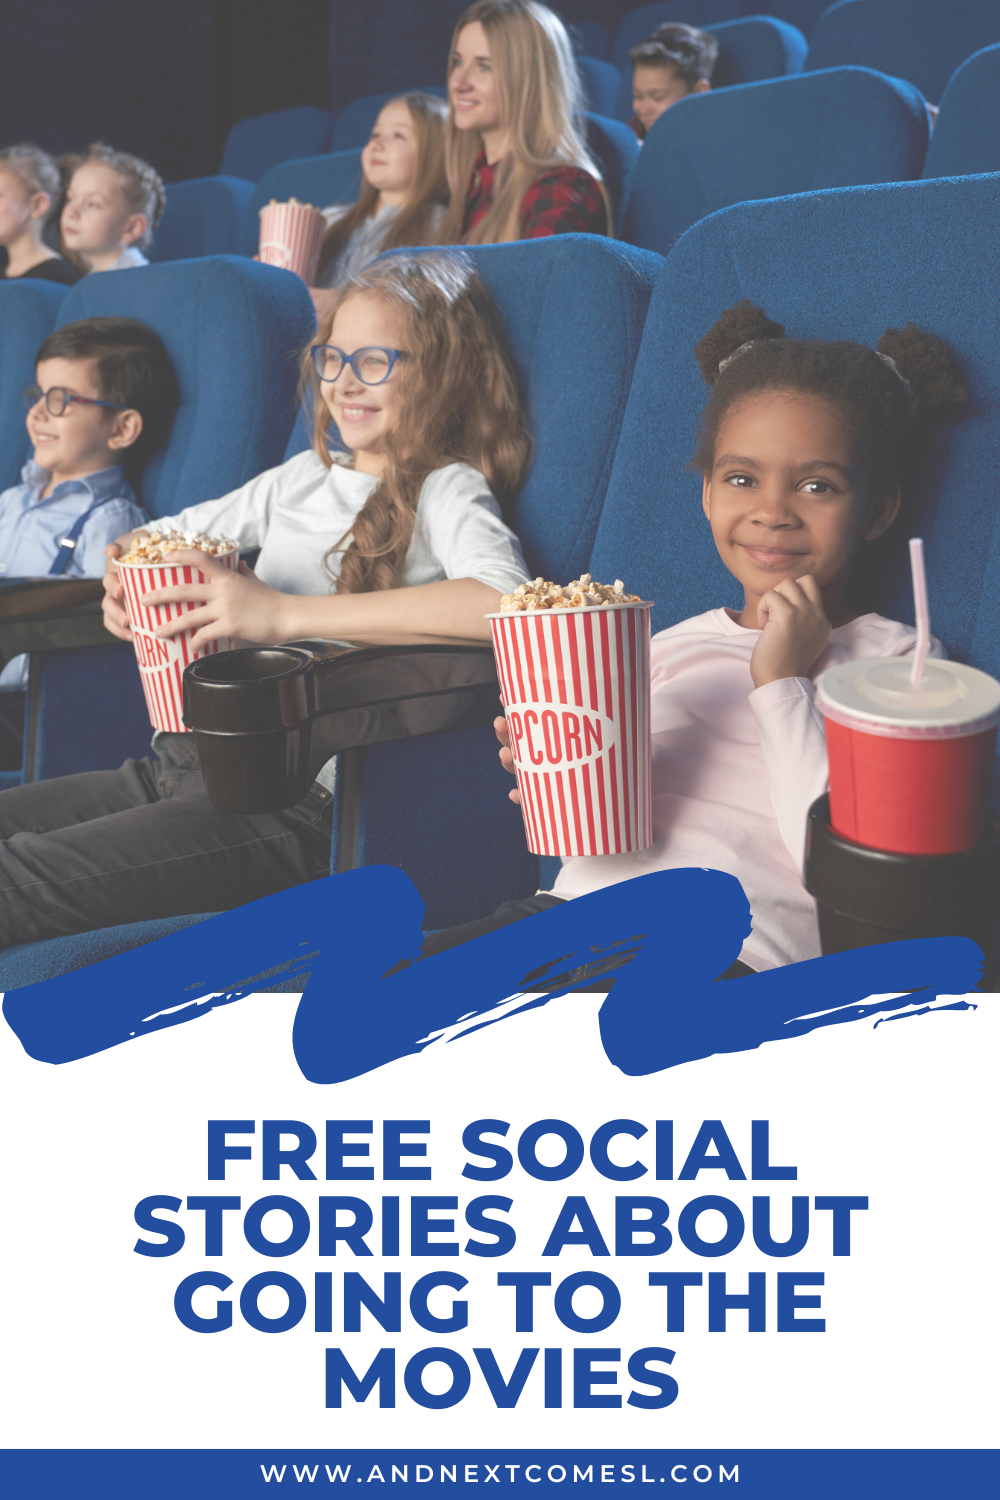 Free social stories about going to the movies, movie theater, or cinema